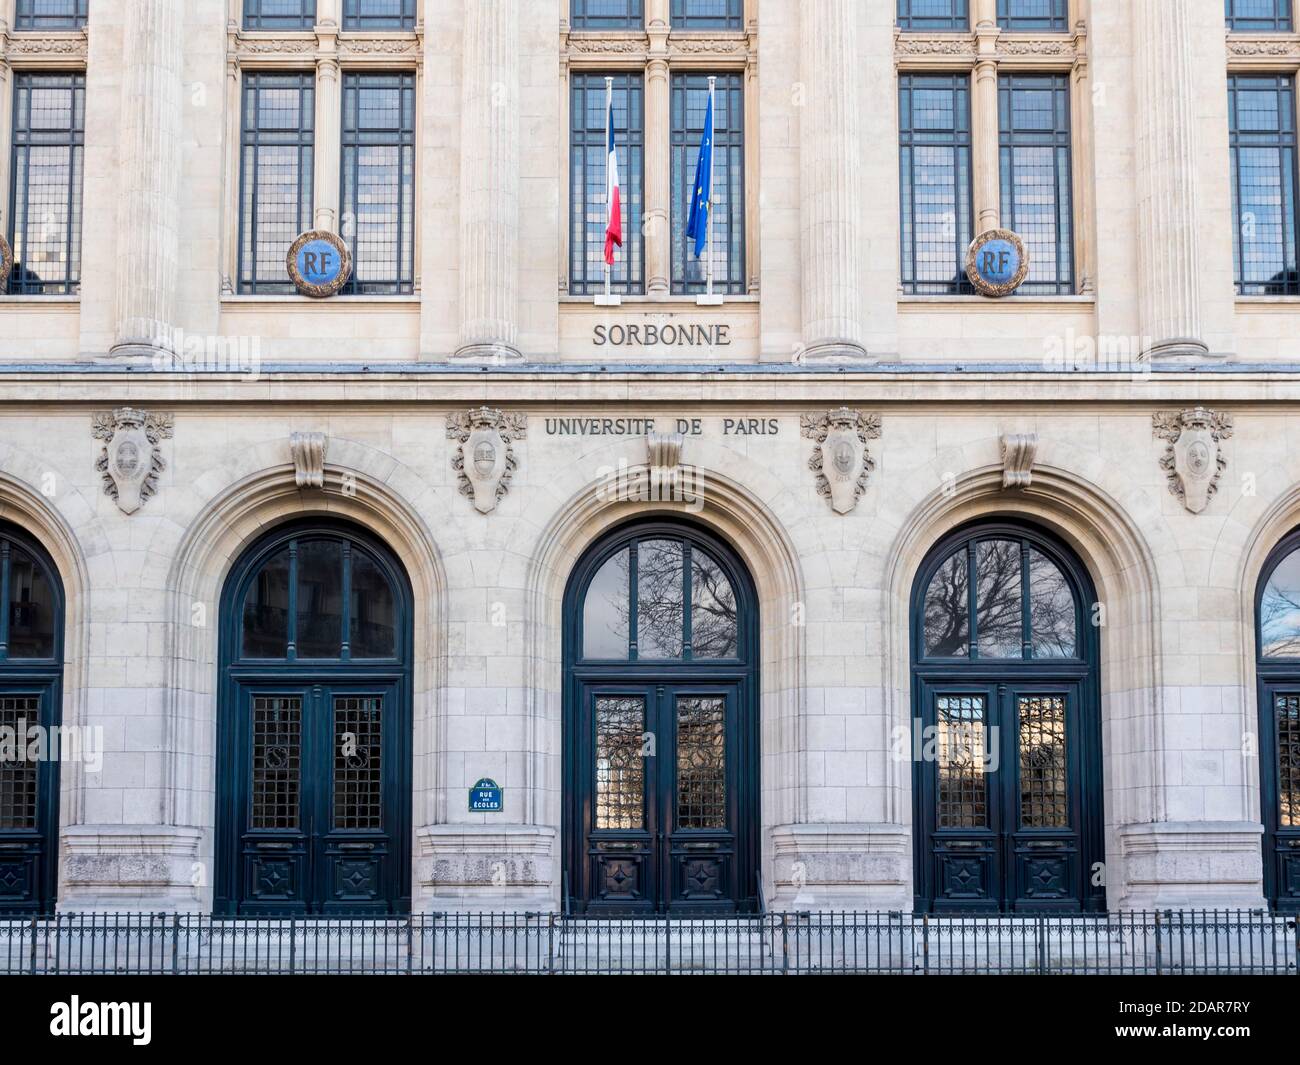 Facade and entrance to the Sorbonne University building, Paris, France Stock Photo